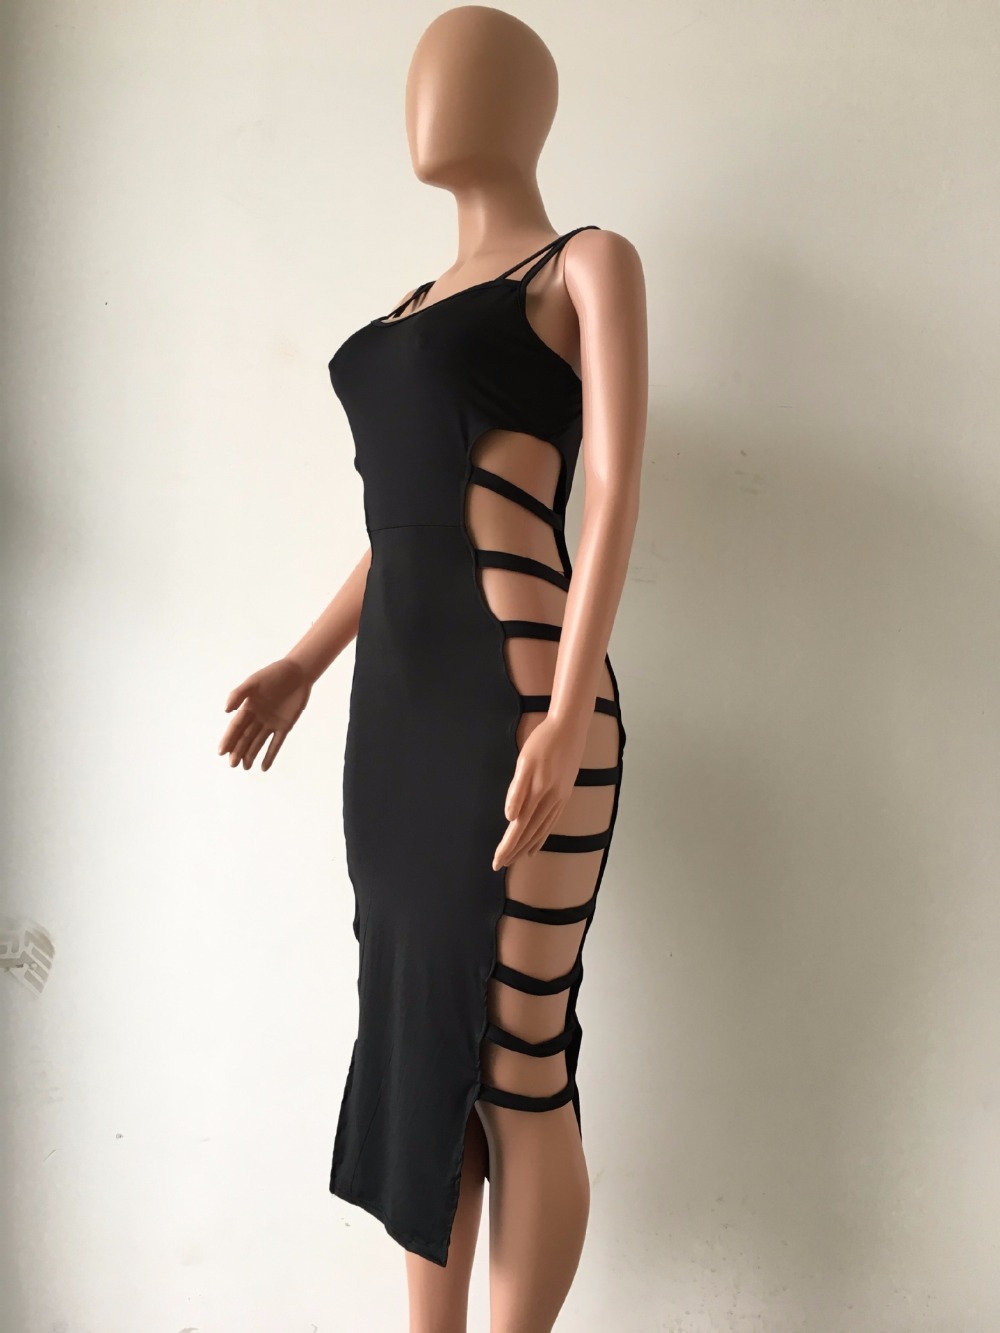 Fashion-sexy-dresses-2017-new-arrivals-women-summer-black-sleeveless-strapless-backless-hollow-out-s-32797692711